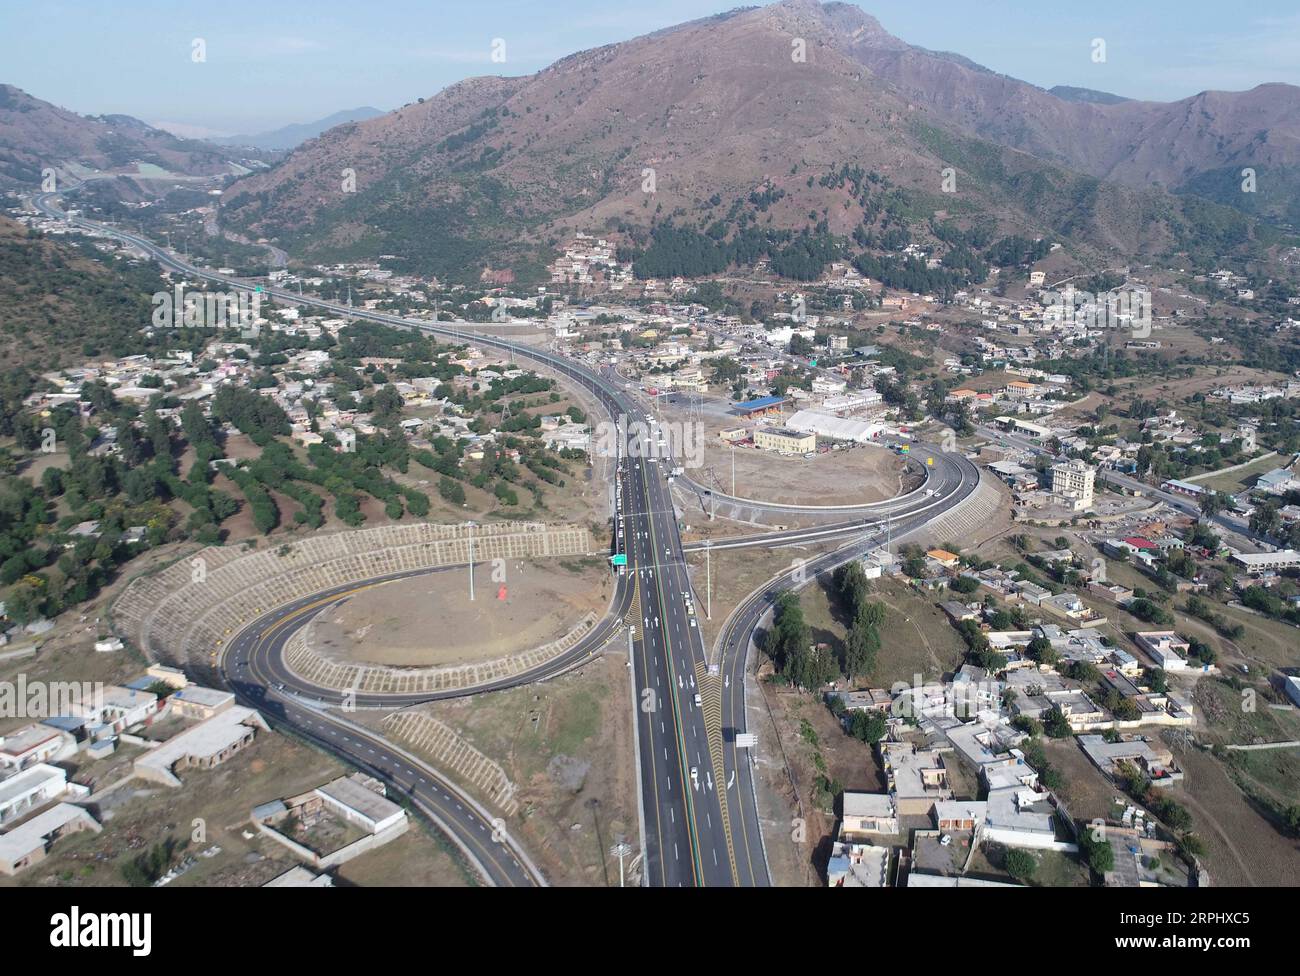 191119 -- HAVELIAN, Nov. 19, 2019 -- Photo taken on Nov. 18, 2019 shows a view of the expressway section of the Karakorum Highway KKH project phase two in Pakistan. The expressway section of the KKH project phase two was inaugurated in Havelian in northwestern Pakistan on Monday, marking another step forward to complete the early harvest project under the China-Pakistan Economic Corridor CPEC. The inaugurated expressway section from Havelian to Mansehra, is 40 km with four lanes. The rest 80-km secondary roads under the KKH phase two project is expected to be completed in February 2020.  PAKIS Stock Photo